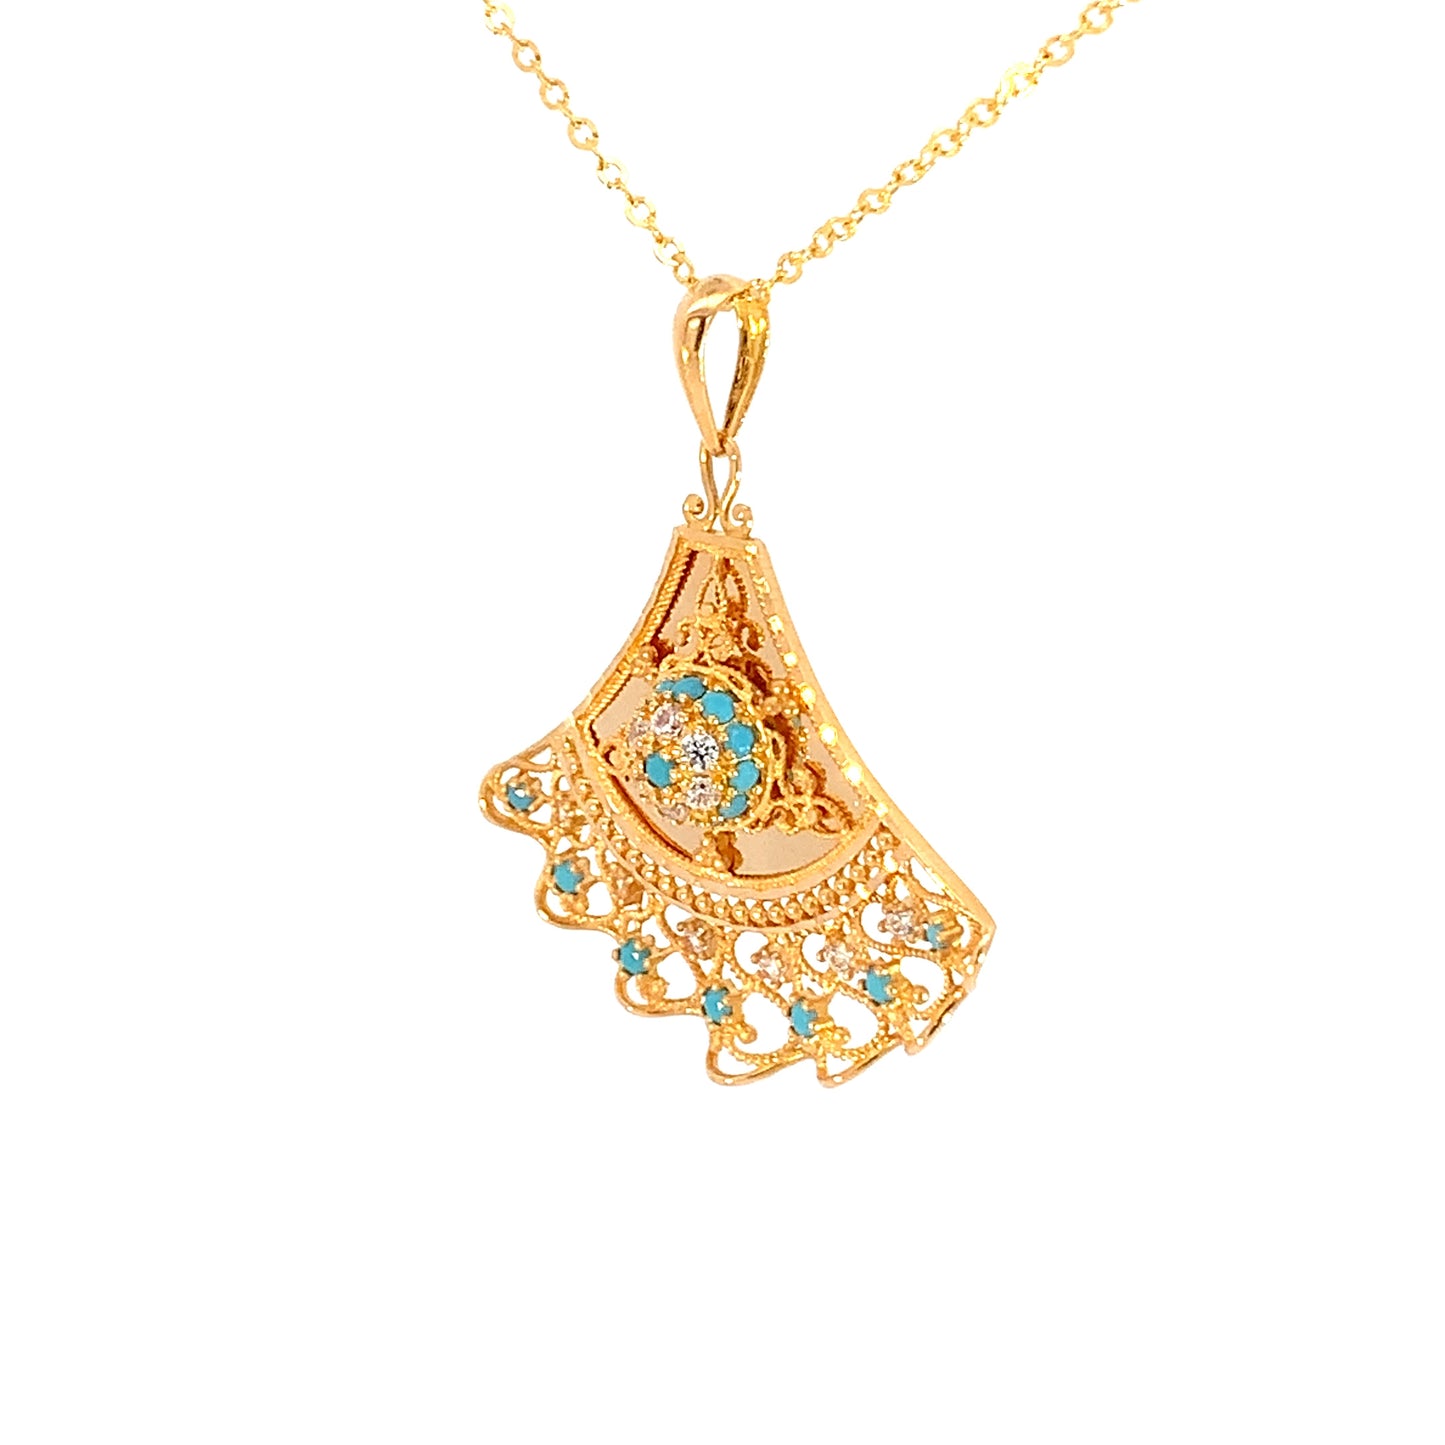 Turath Collection: 21k Fan Pendent - Turquoise